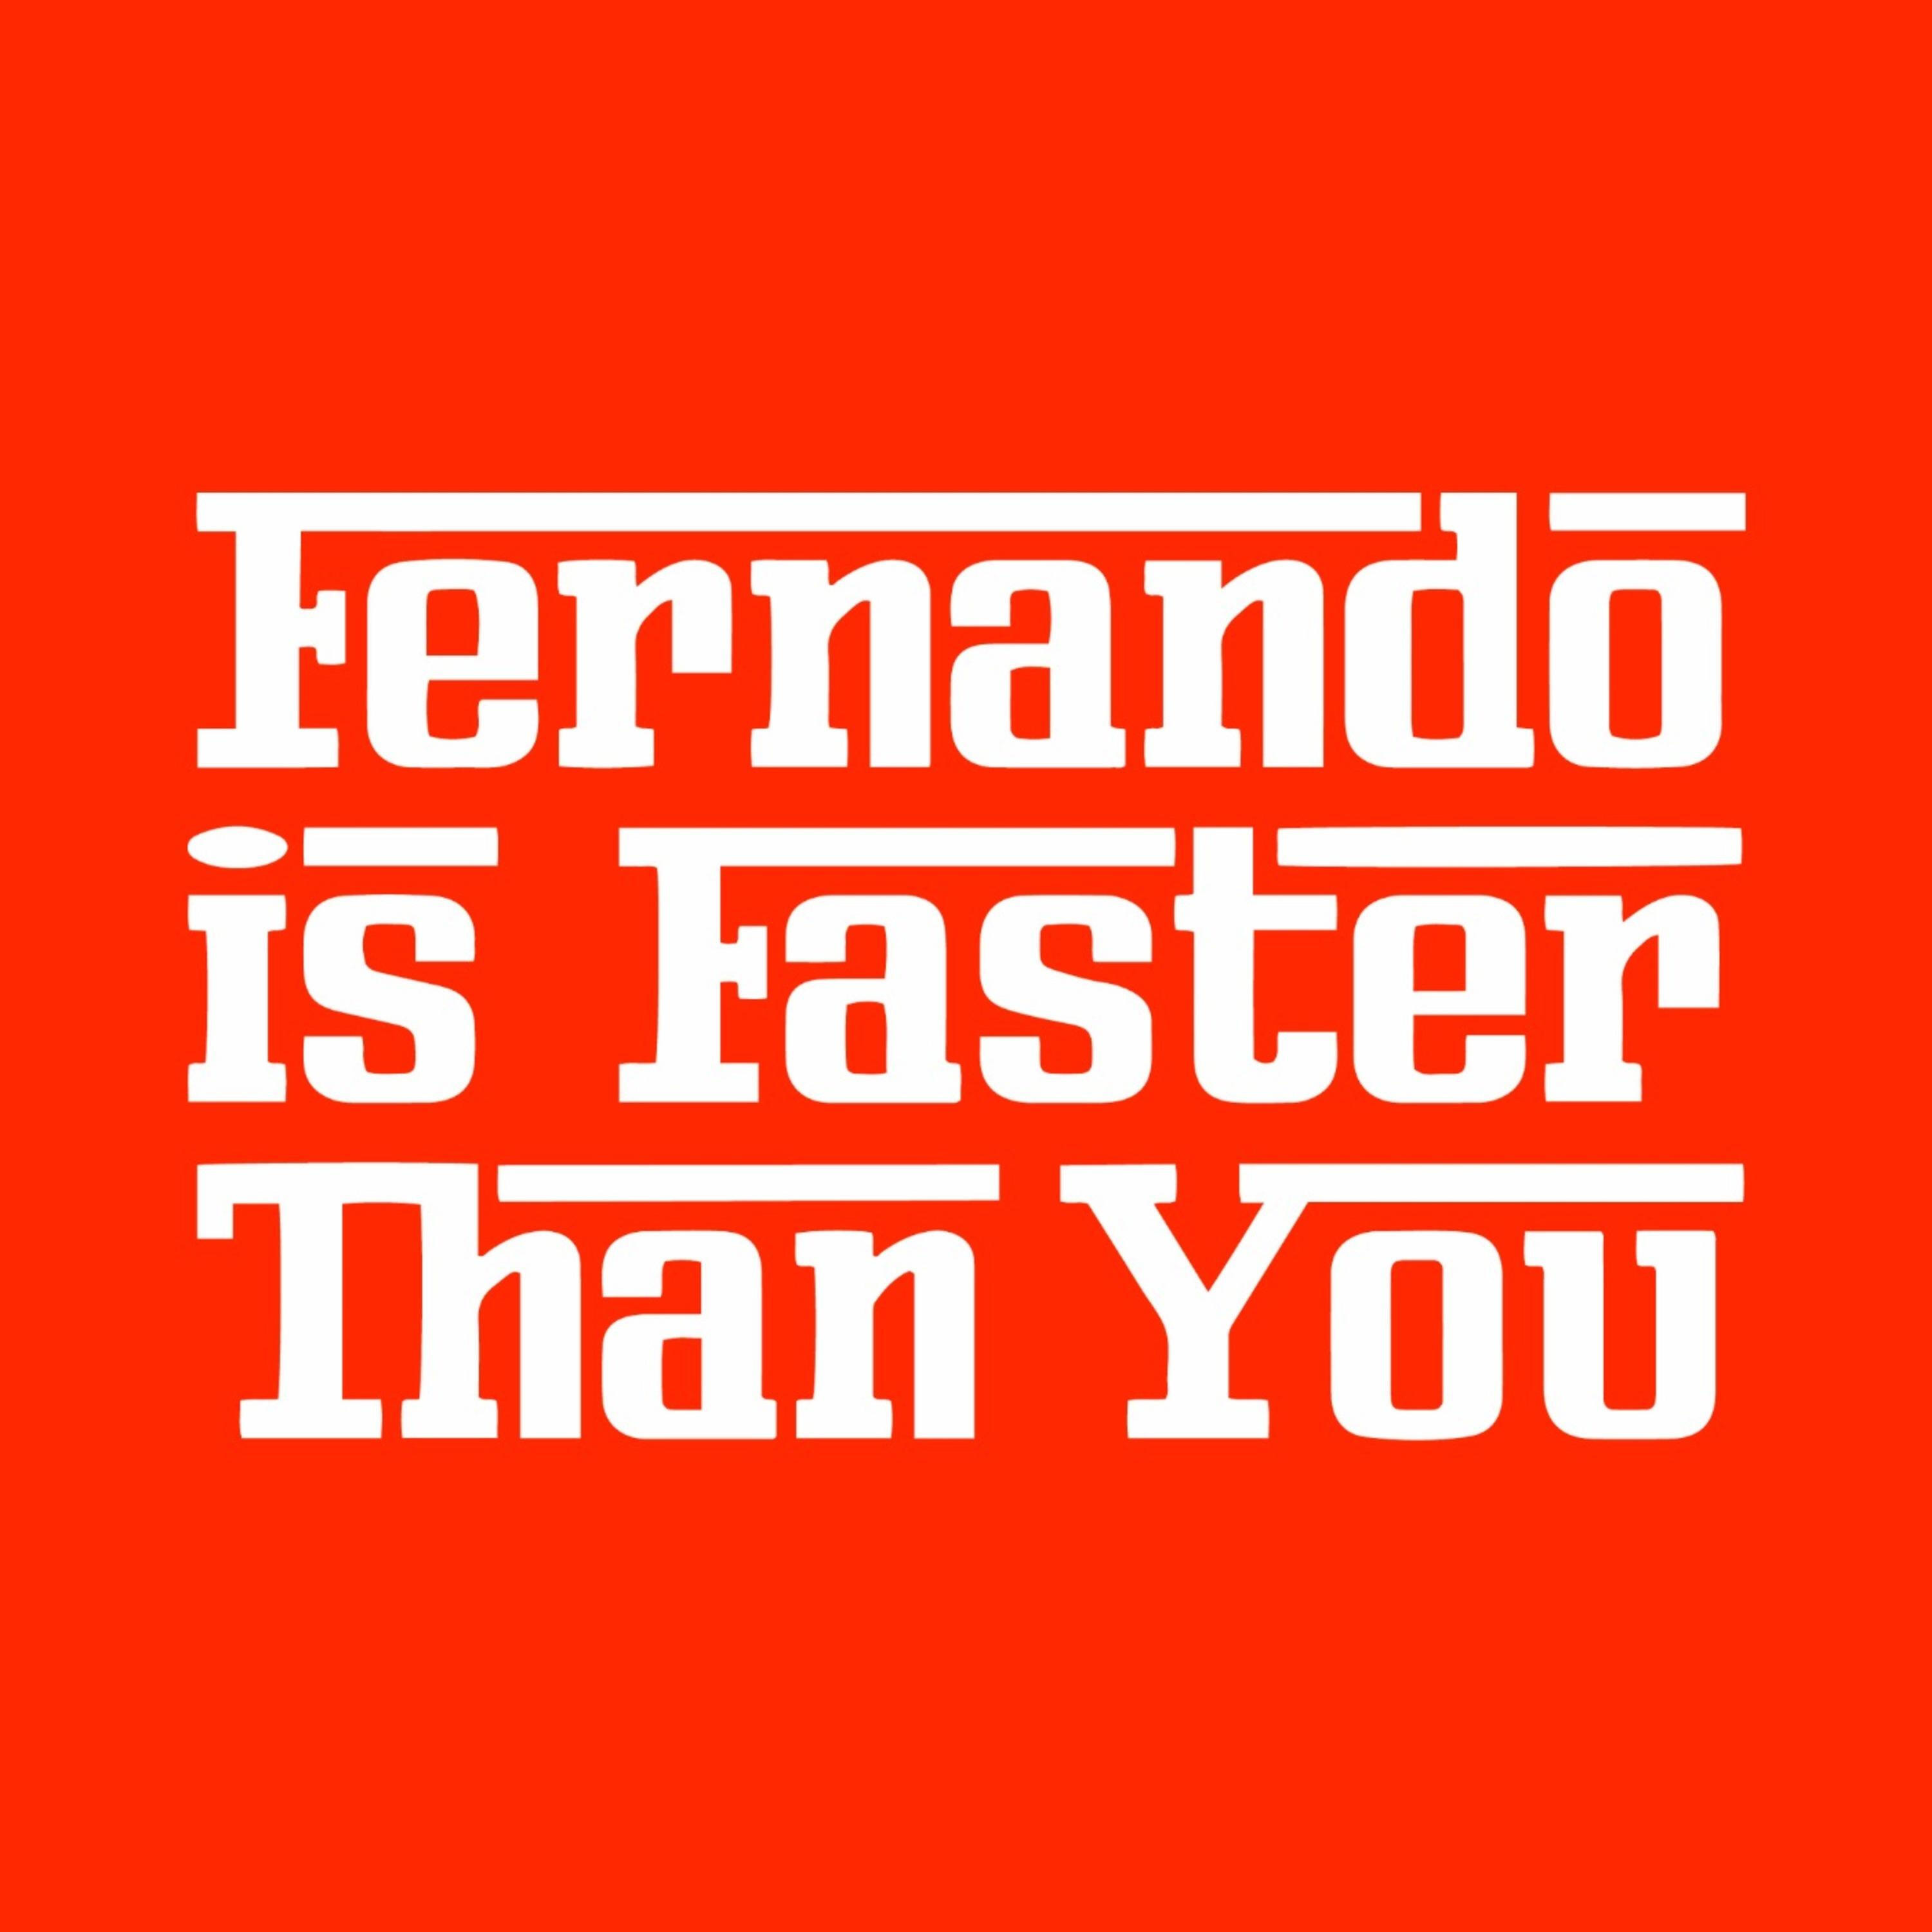 Https is faster. Fernando is faster than you.